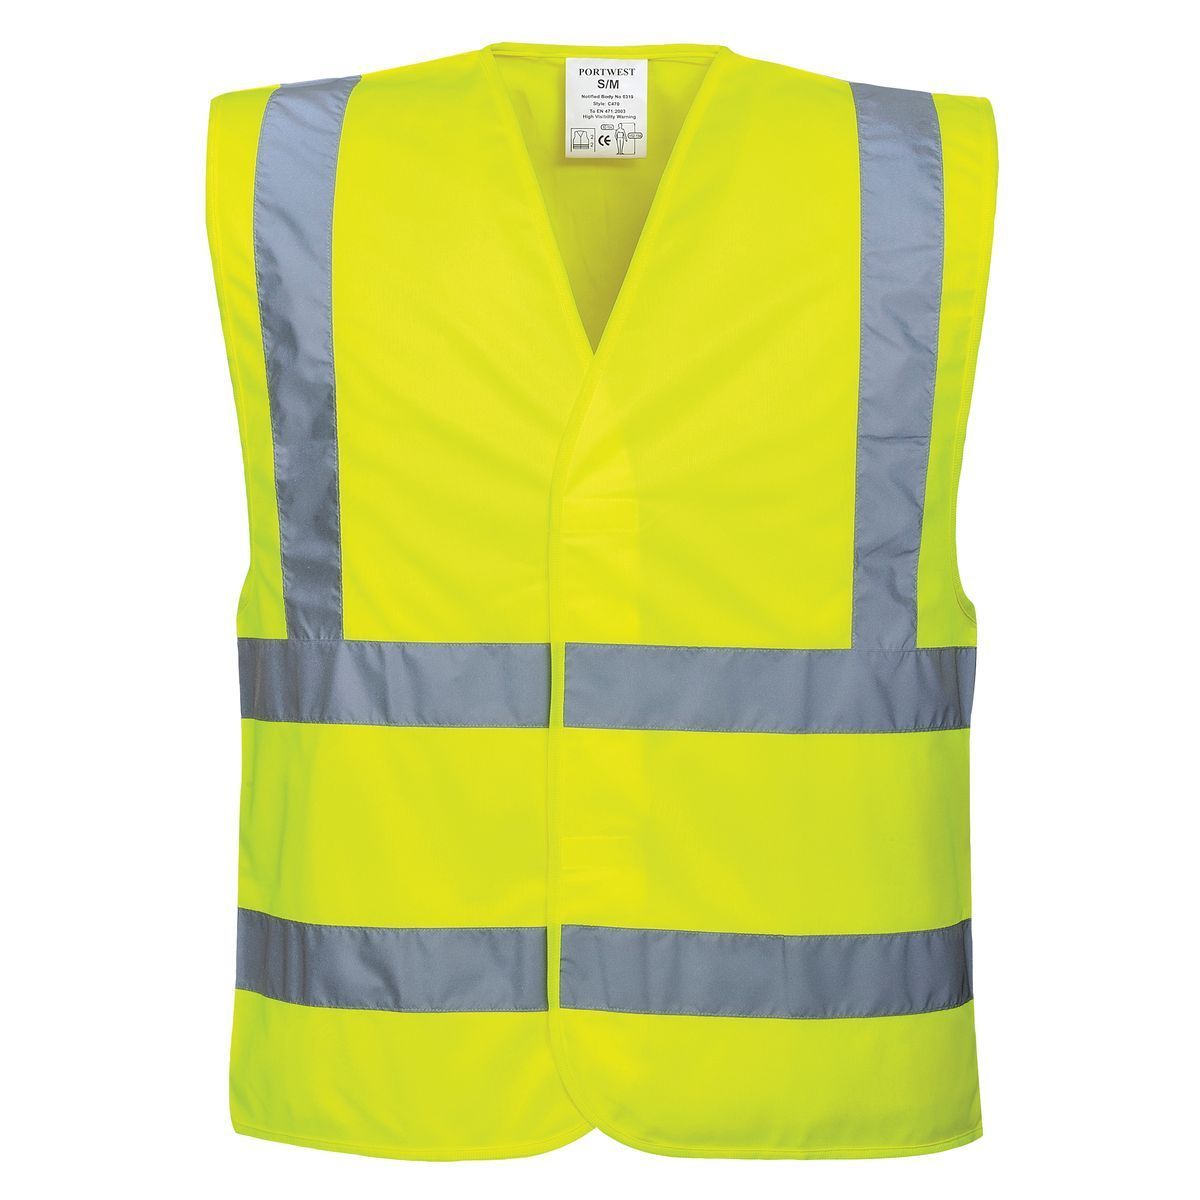 Style C470 HiVis Band and Brace Vest-3